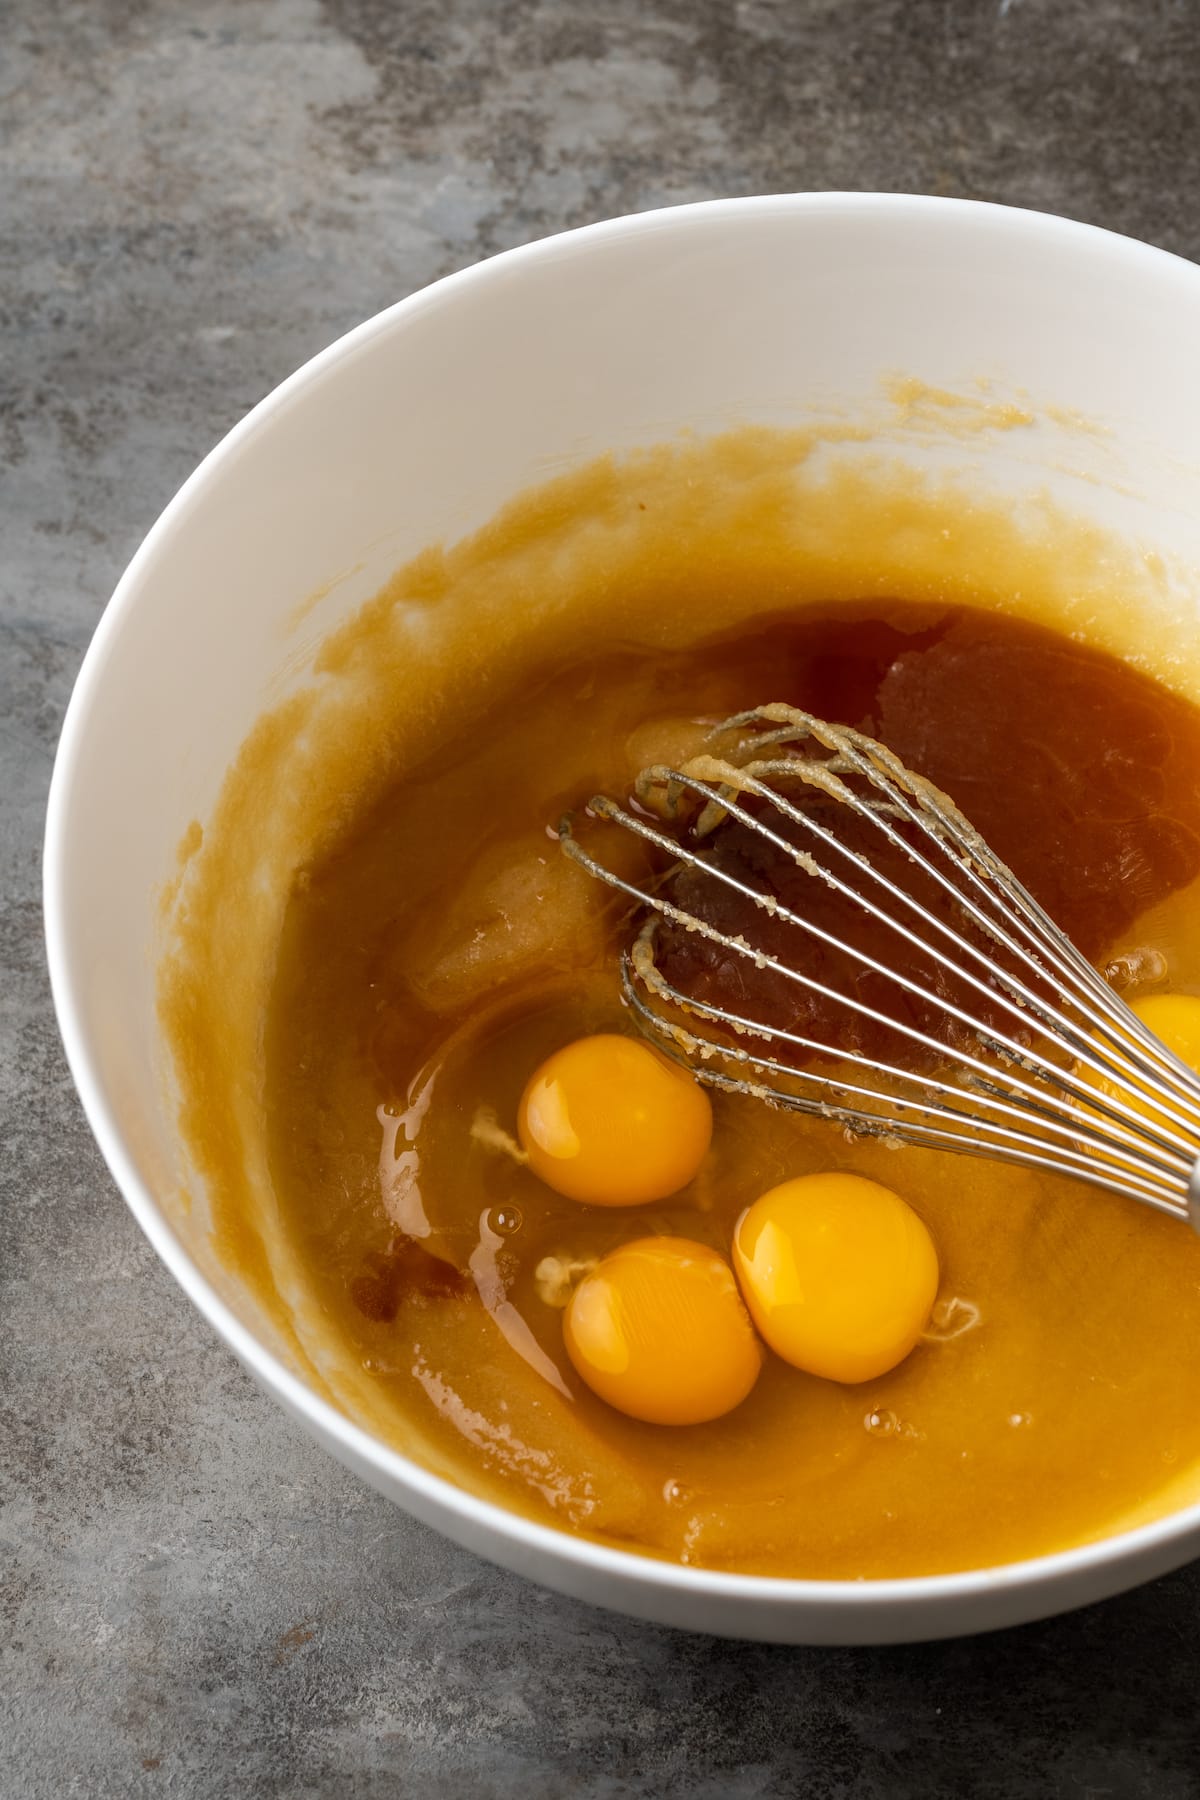 Eggs and vanilla whisked into creamed sugar and butter in a mixing bowl.